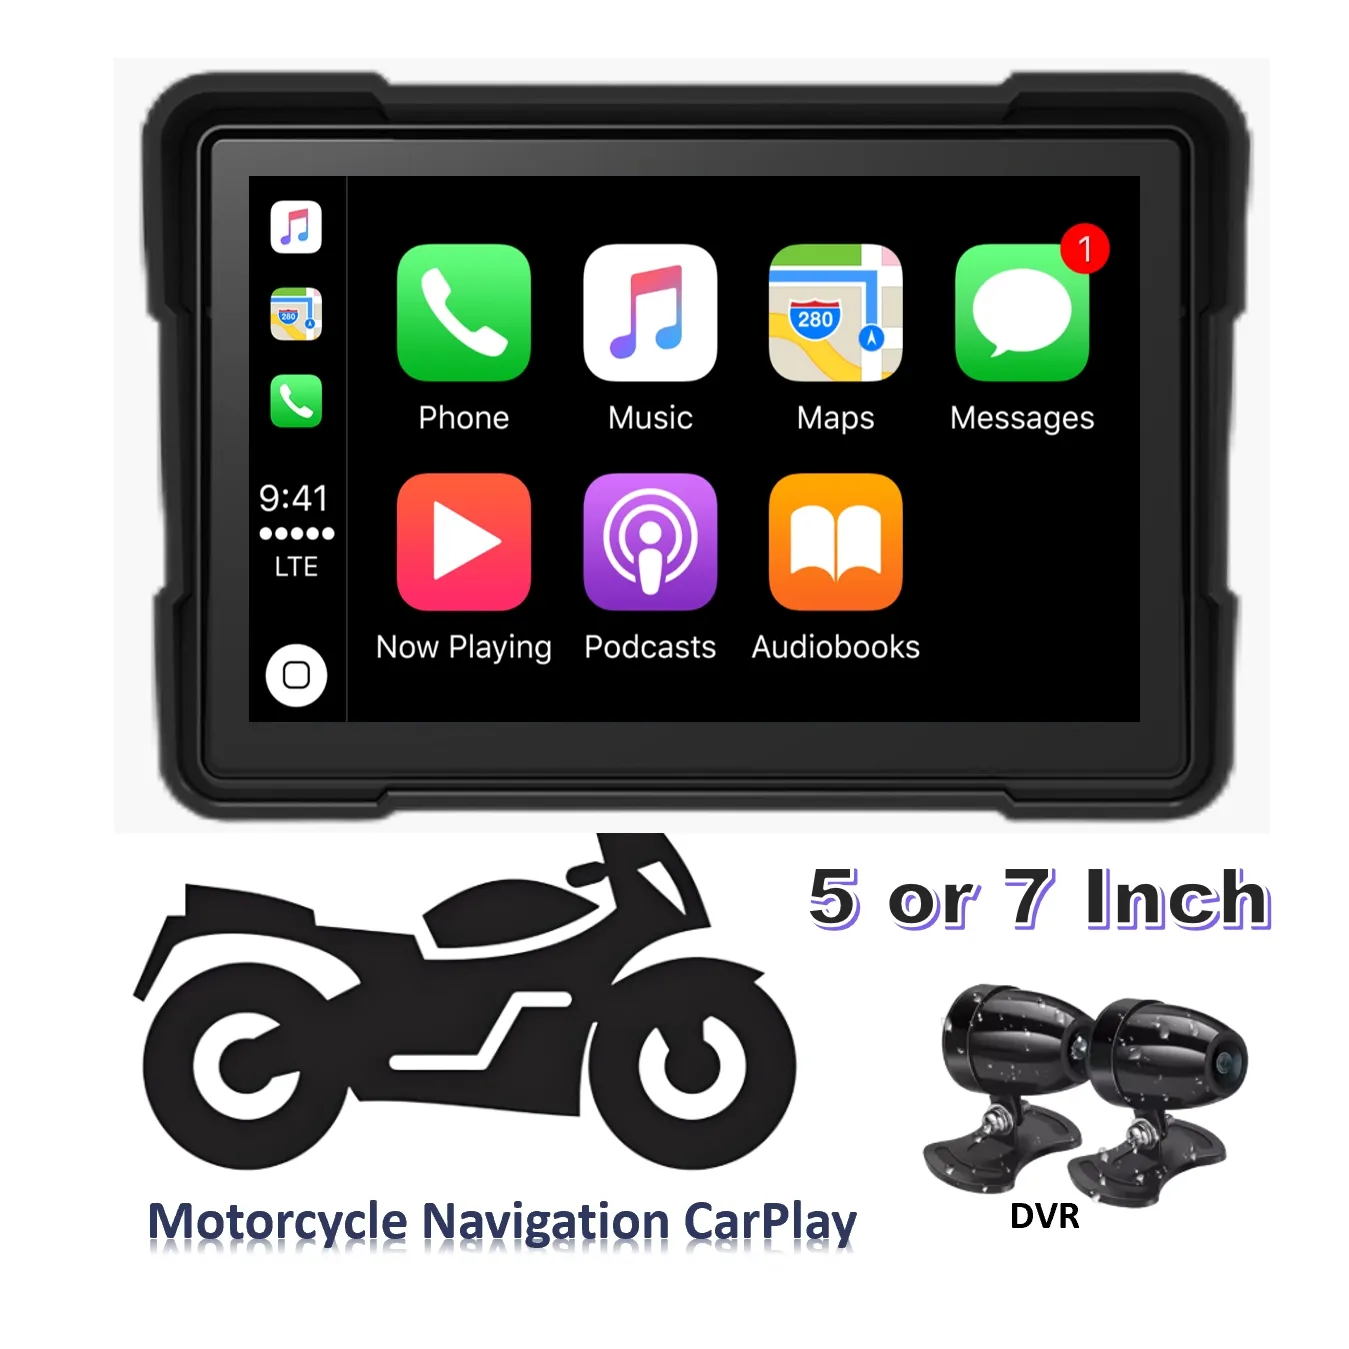 Motorcycle Car Play 5/7 Inch Touch Screen Waterproof Motorcycle Navigation Radio Carplay For Motorcycles